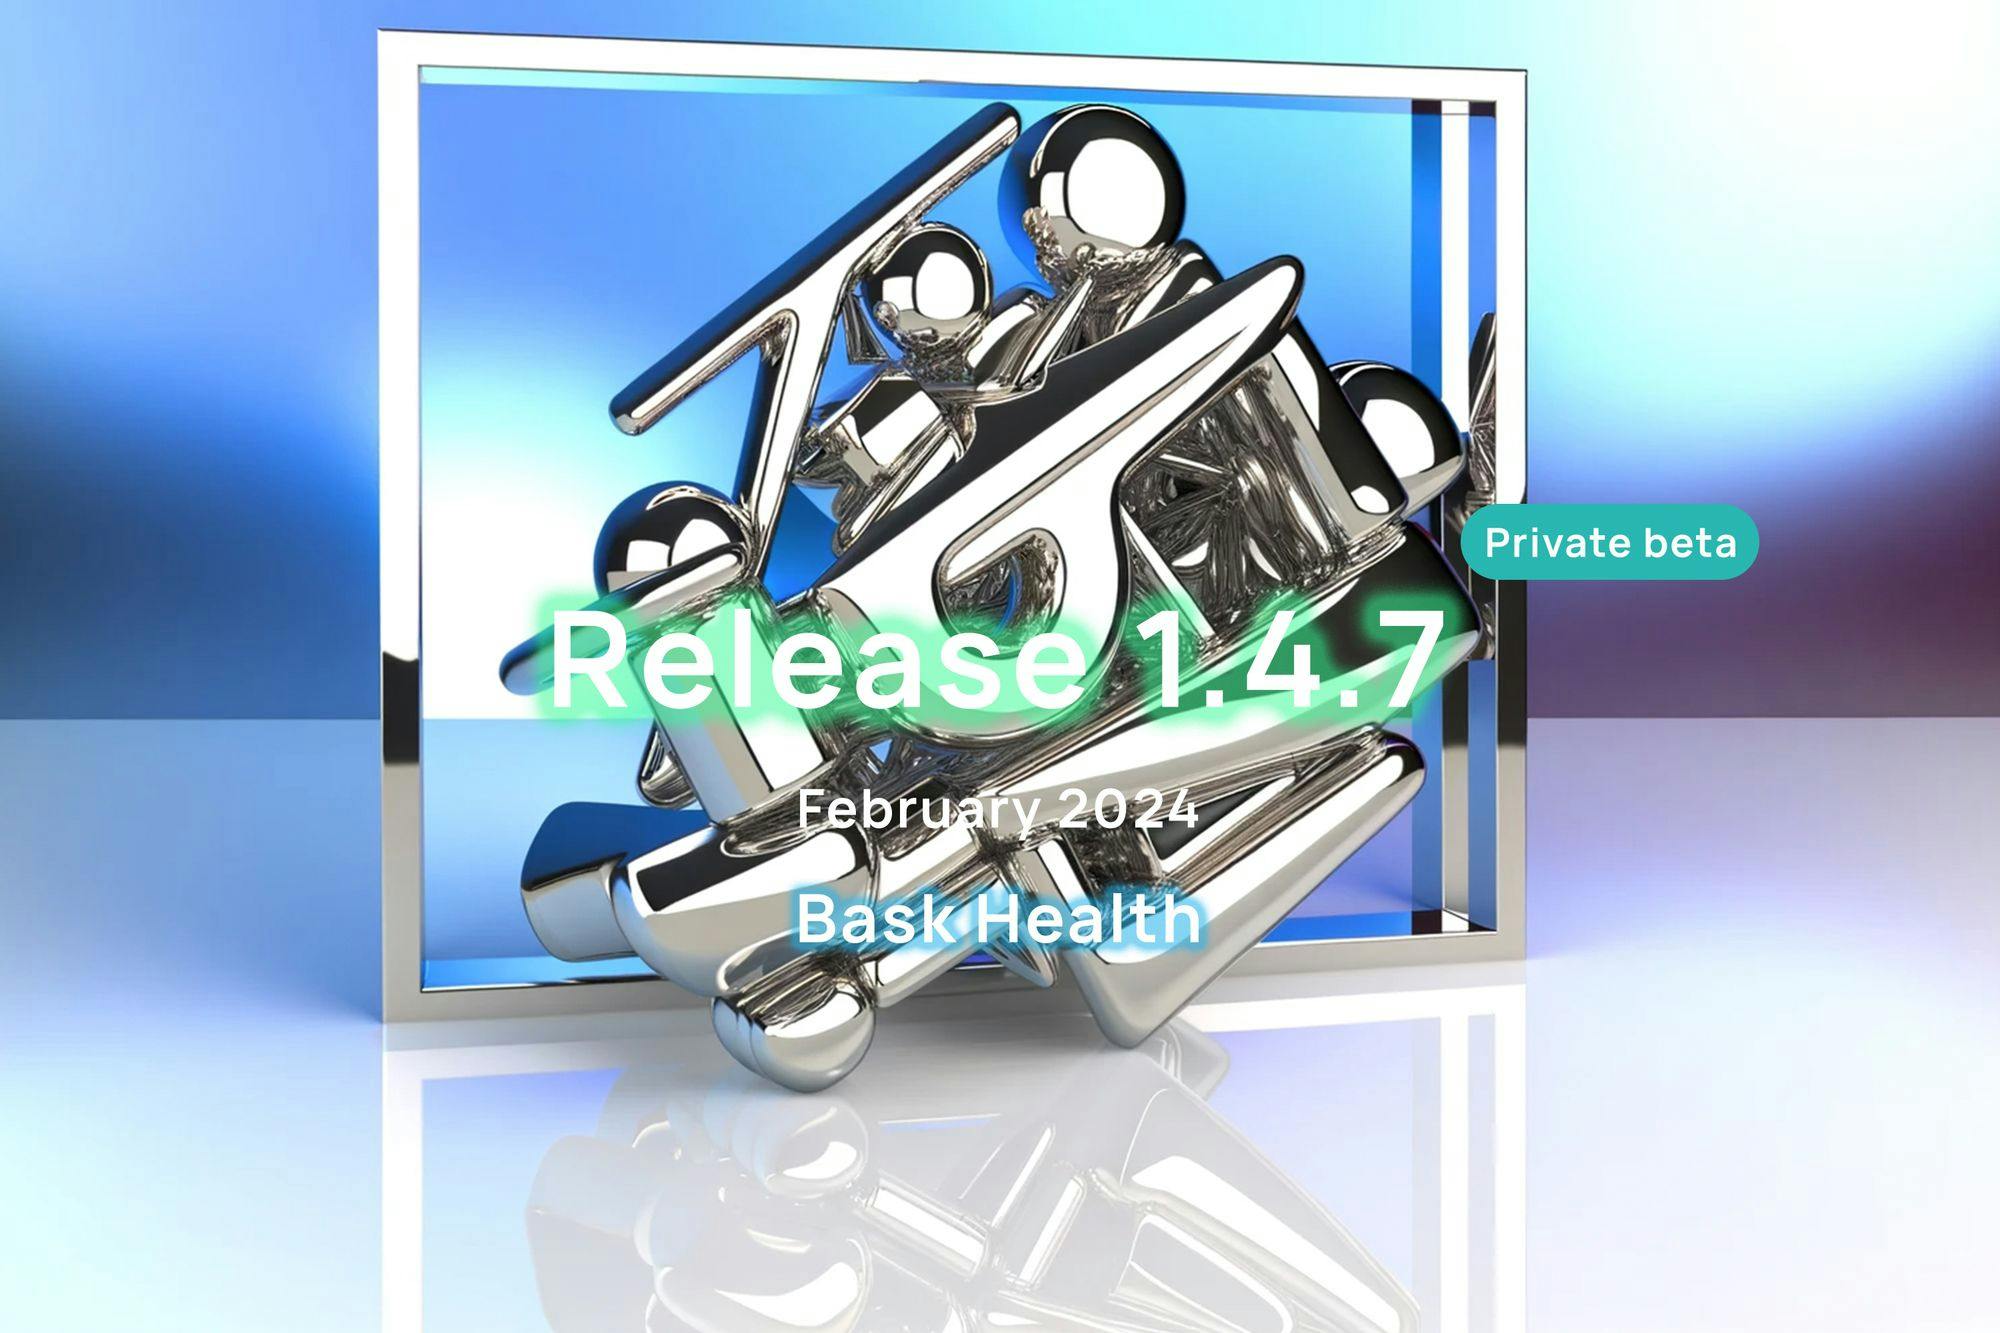 Release 1.4.7